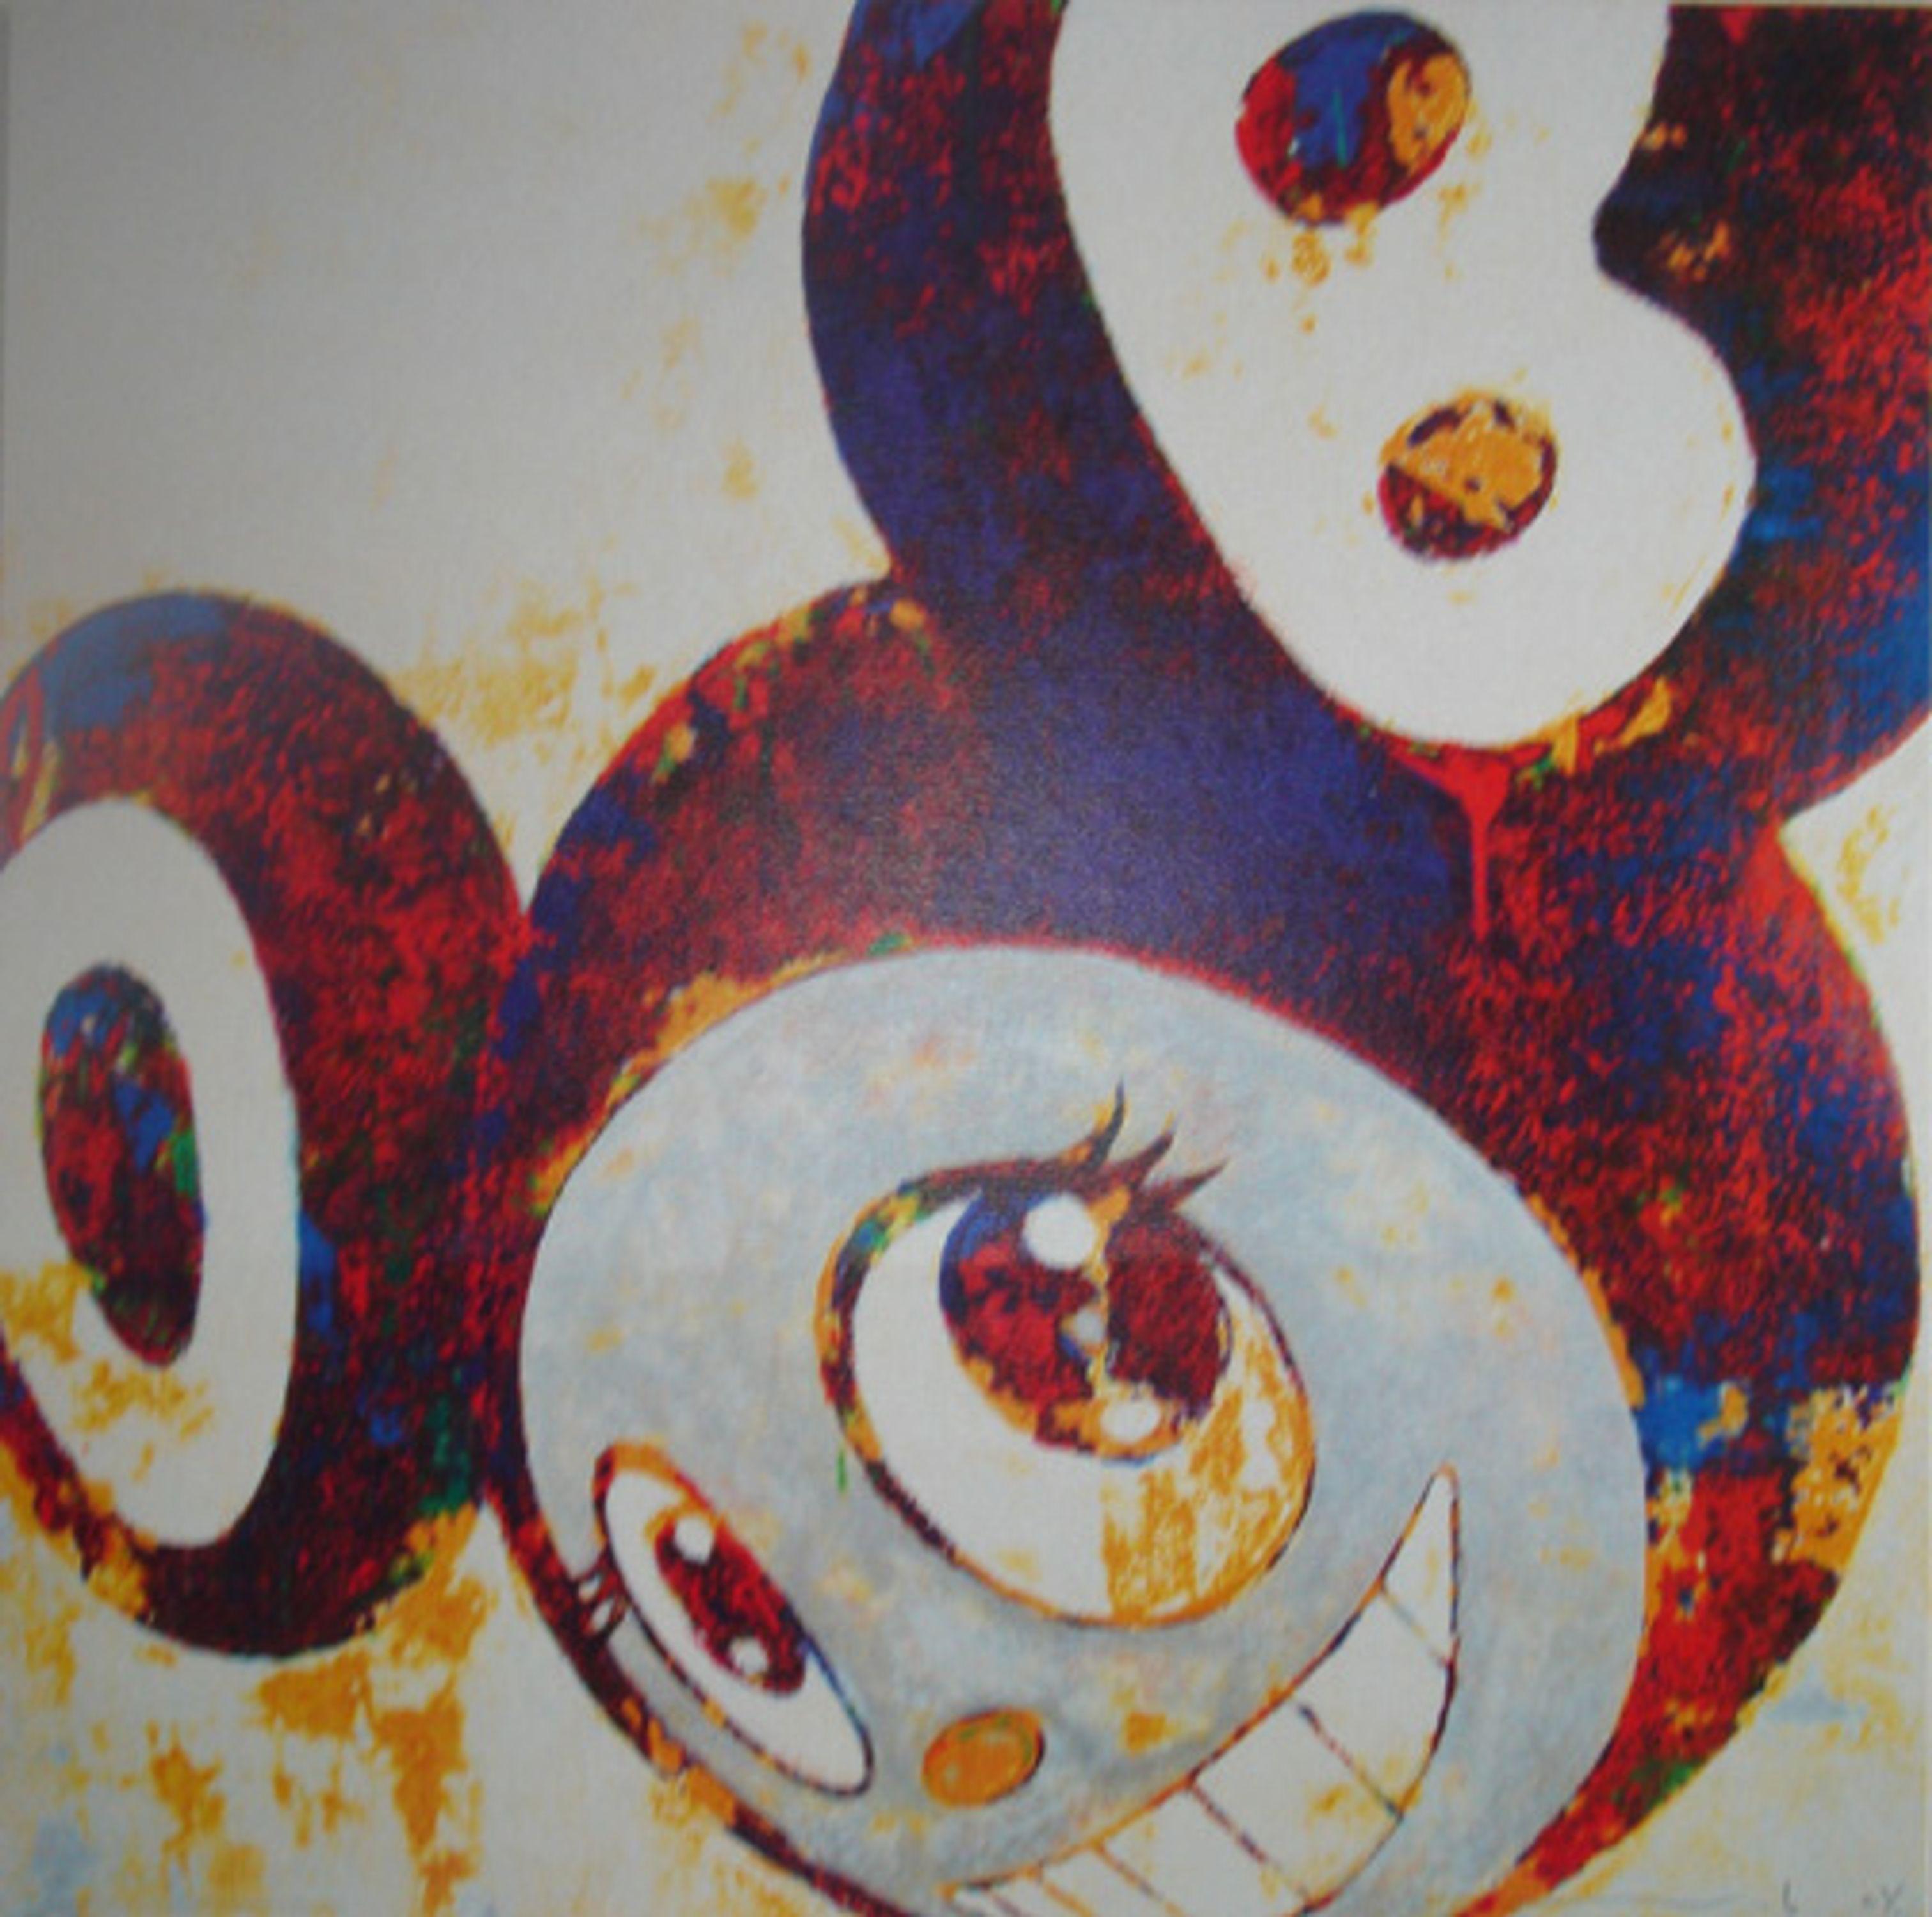 Dob and then, and then, and then - Print by Takashi Murakami